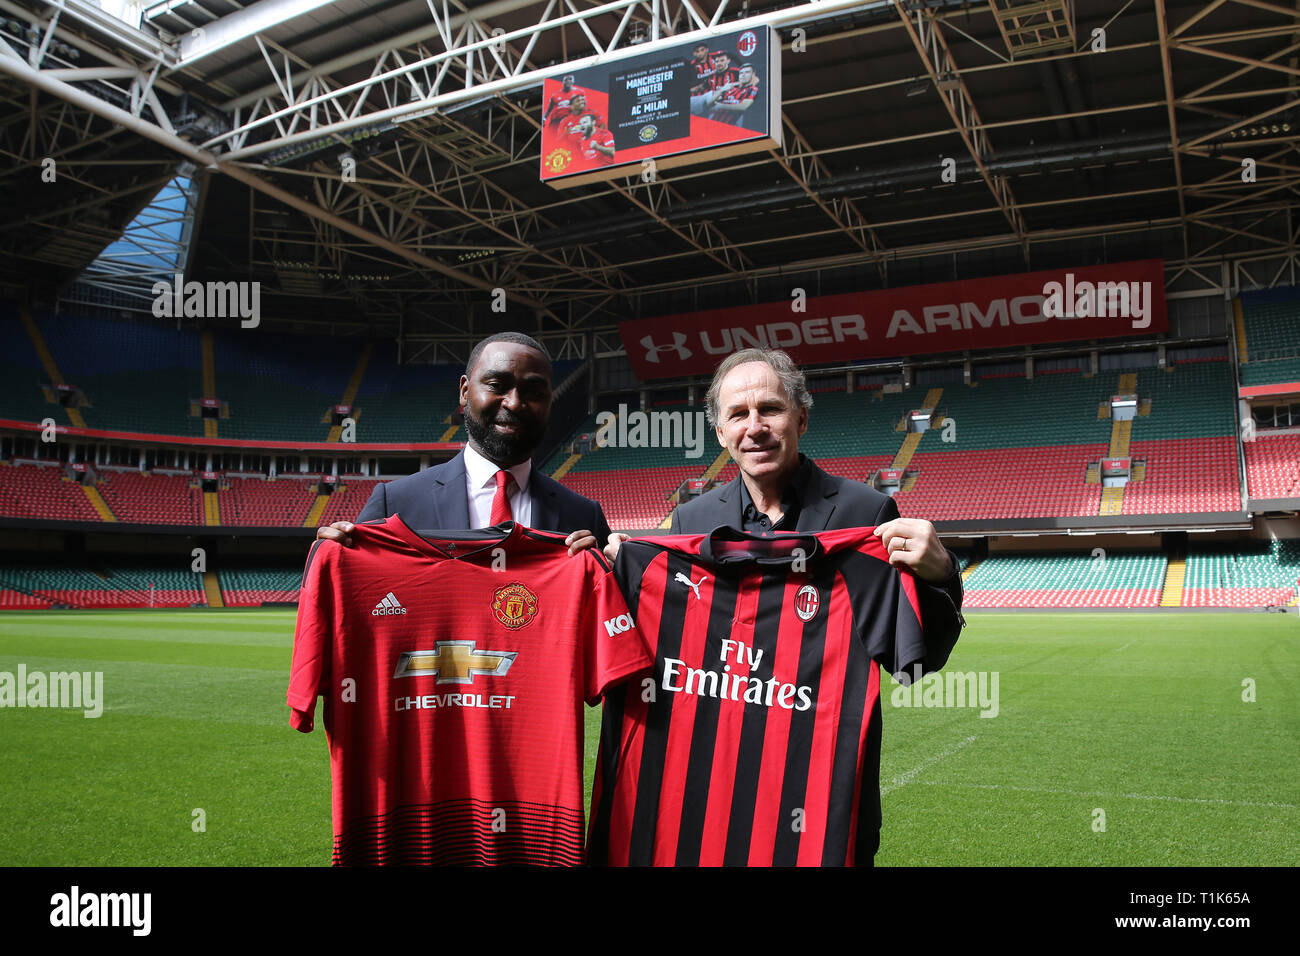 elevation høflighed Forgænger Cardiff, UK. 27th Mar, 2019. Andrew Cole (Man Utd legend) and Franco Baresi  (AC Milan legend) at the launch.International Champions Cup European launch  press conference at the Principality Stadium in Cardiff, South